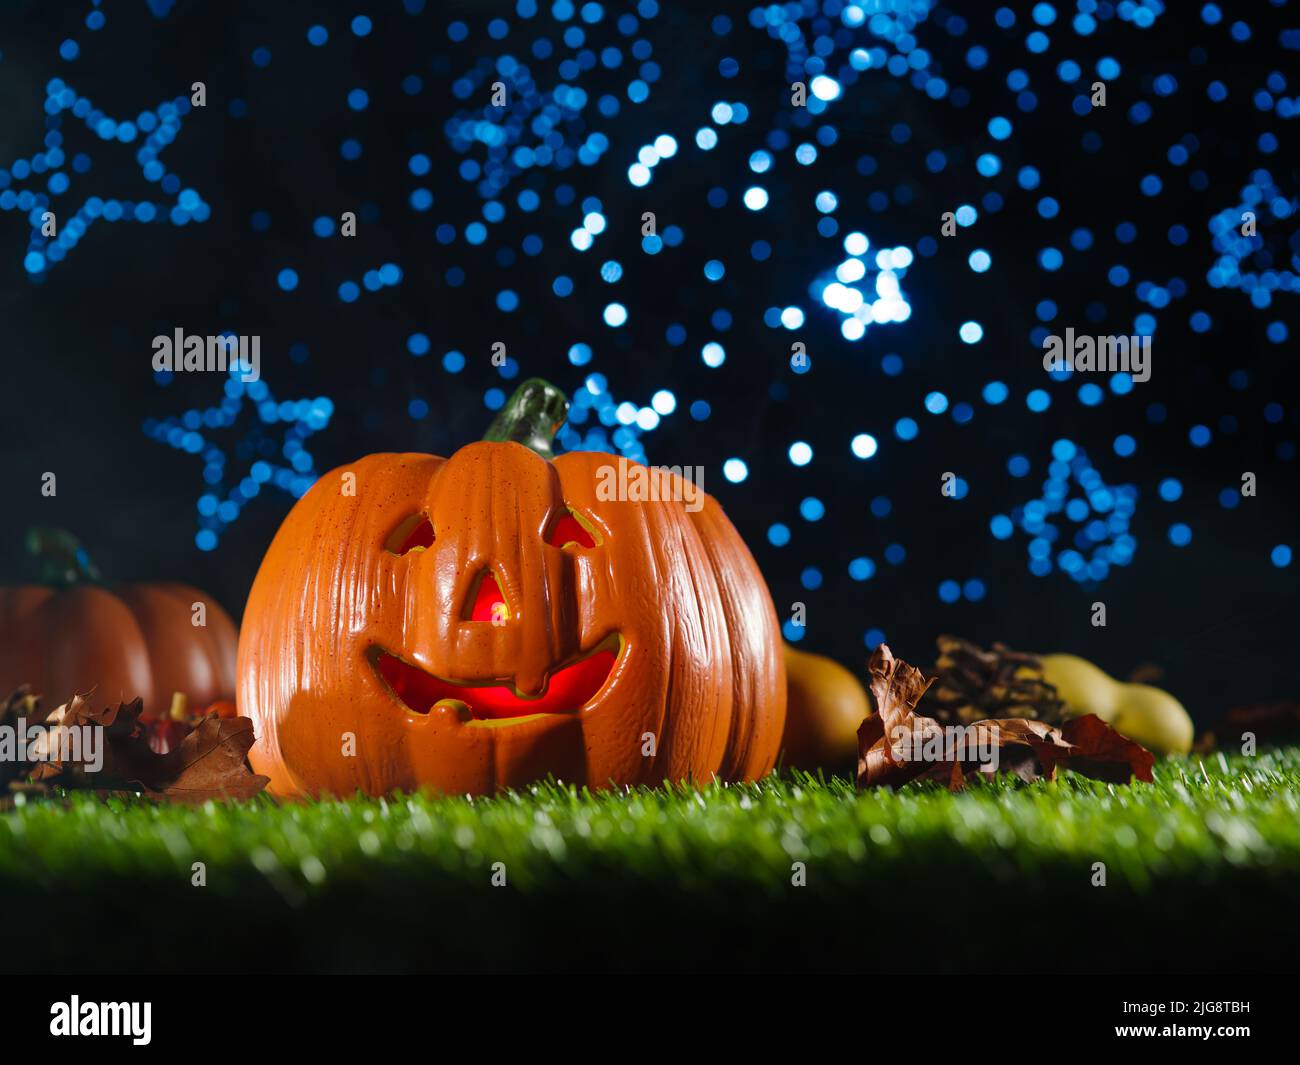 Mystical Halloween composition. Smiling halloween pumpkin with illuminated carved face, autumn fruits, cones on a green lawn against a blue shimmering Stock Photo